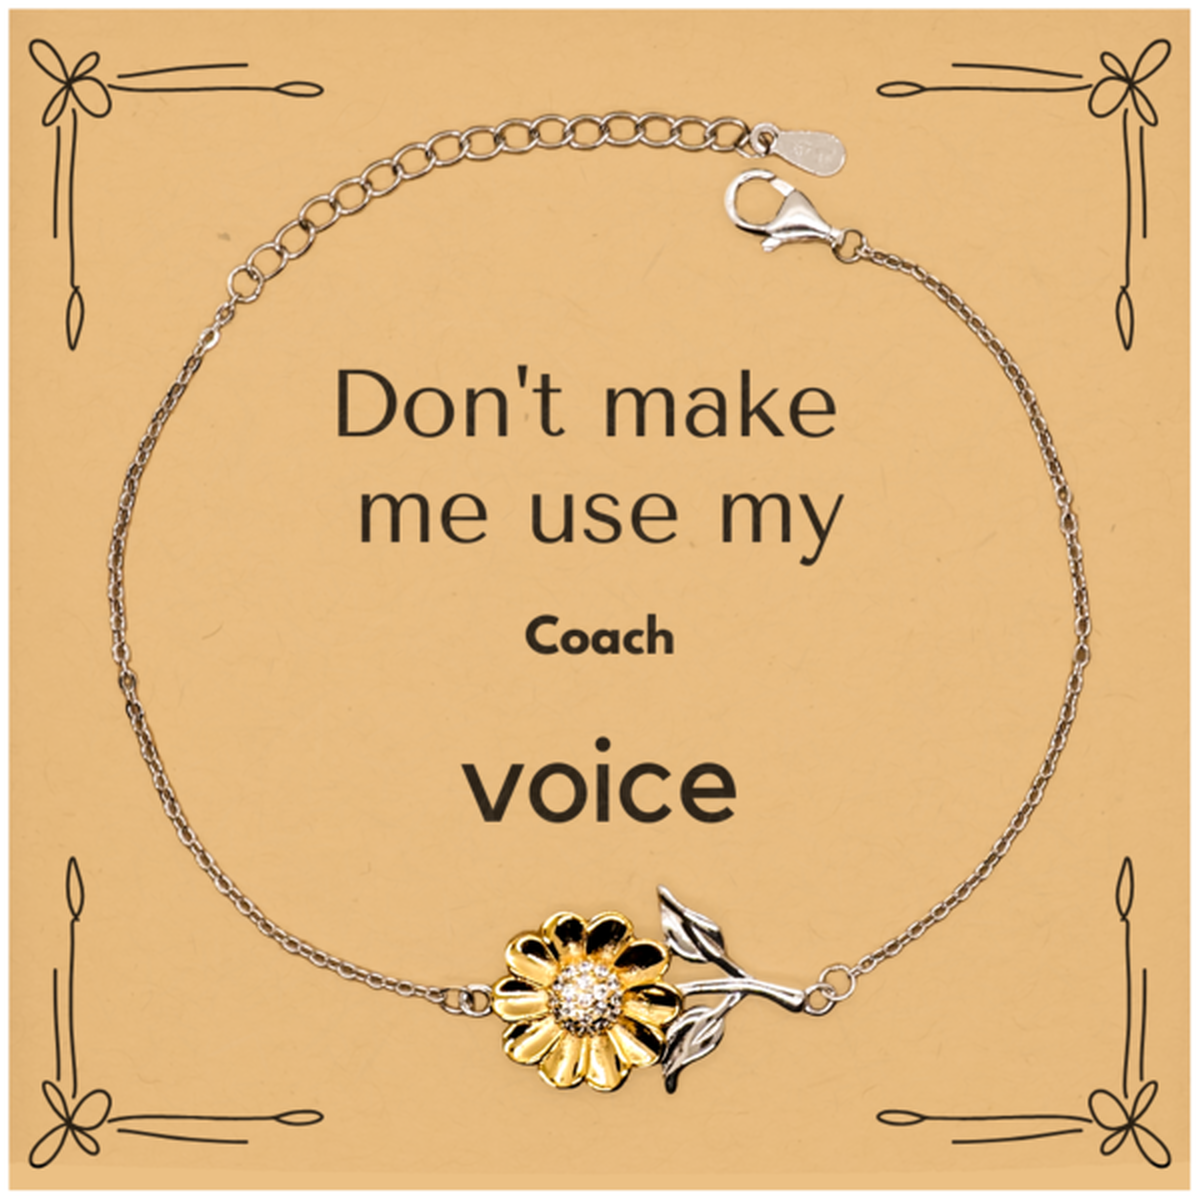 Don't make me use my Coach voice, Sarcasm Coach Card Gifts, Christmas Coach Sunflower Bracelet Birthday Unique Gifts For Coach Coworkers, Men, Women, Colleague, Friends